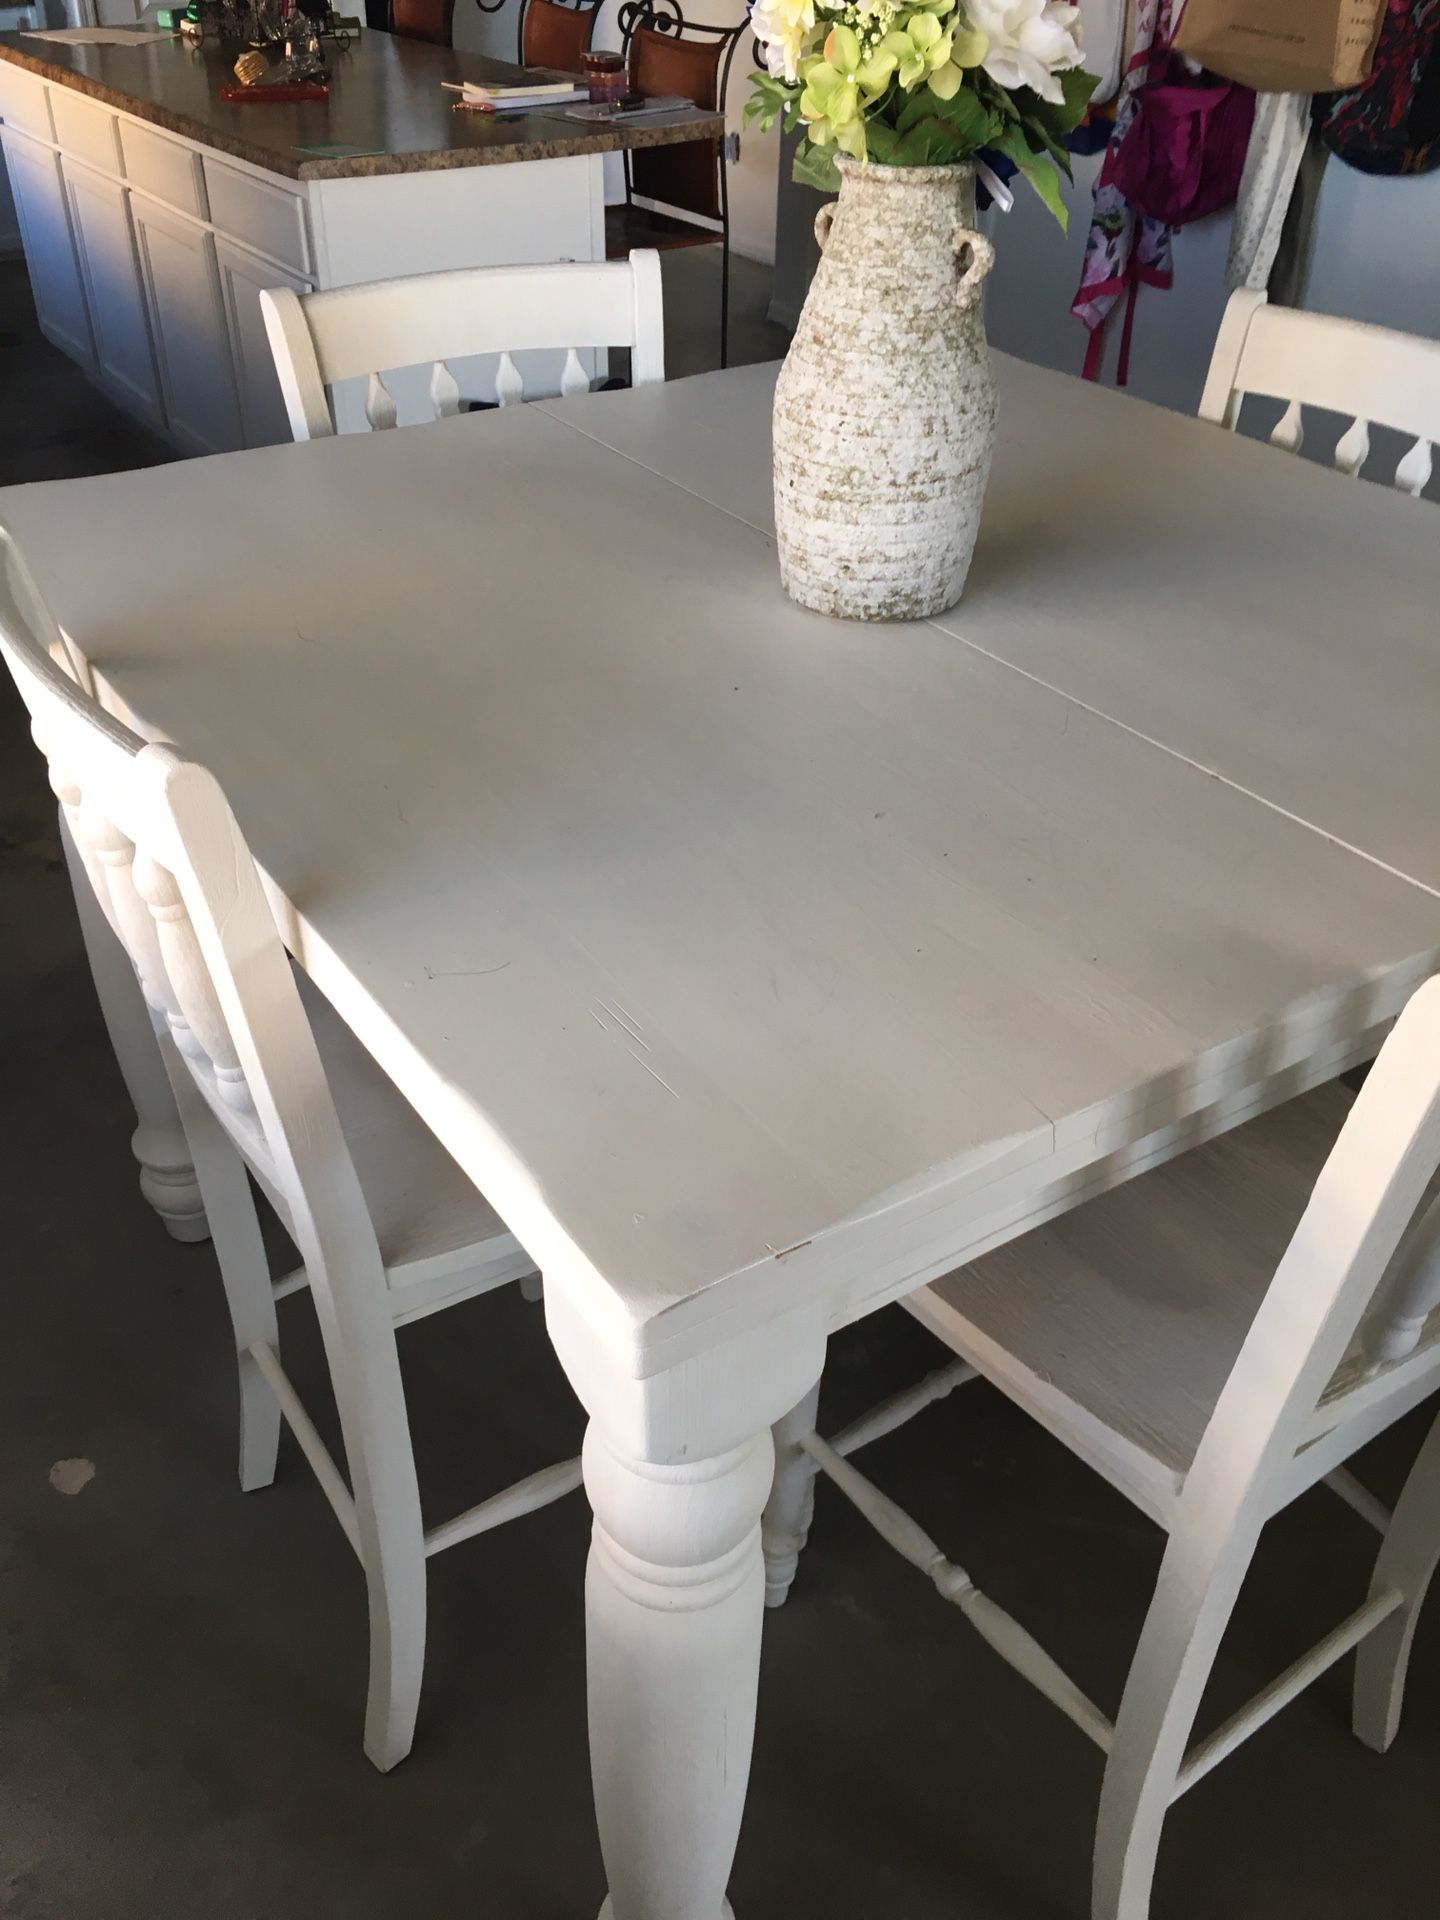 Refurbished dining room table